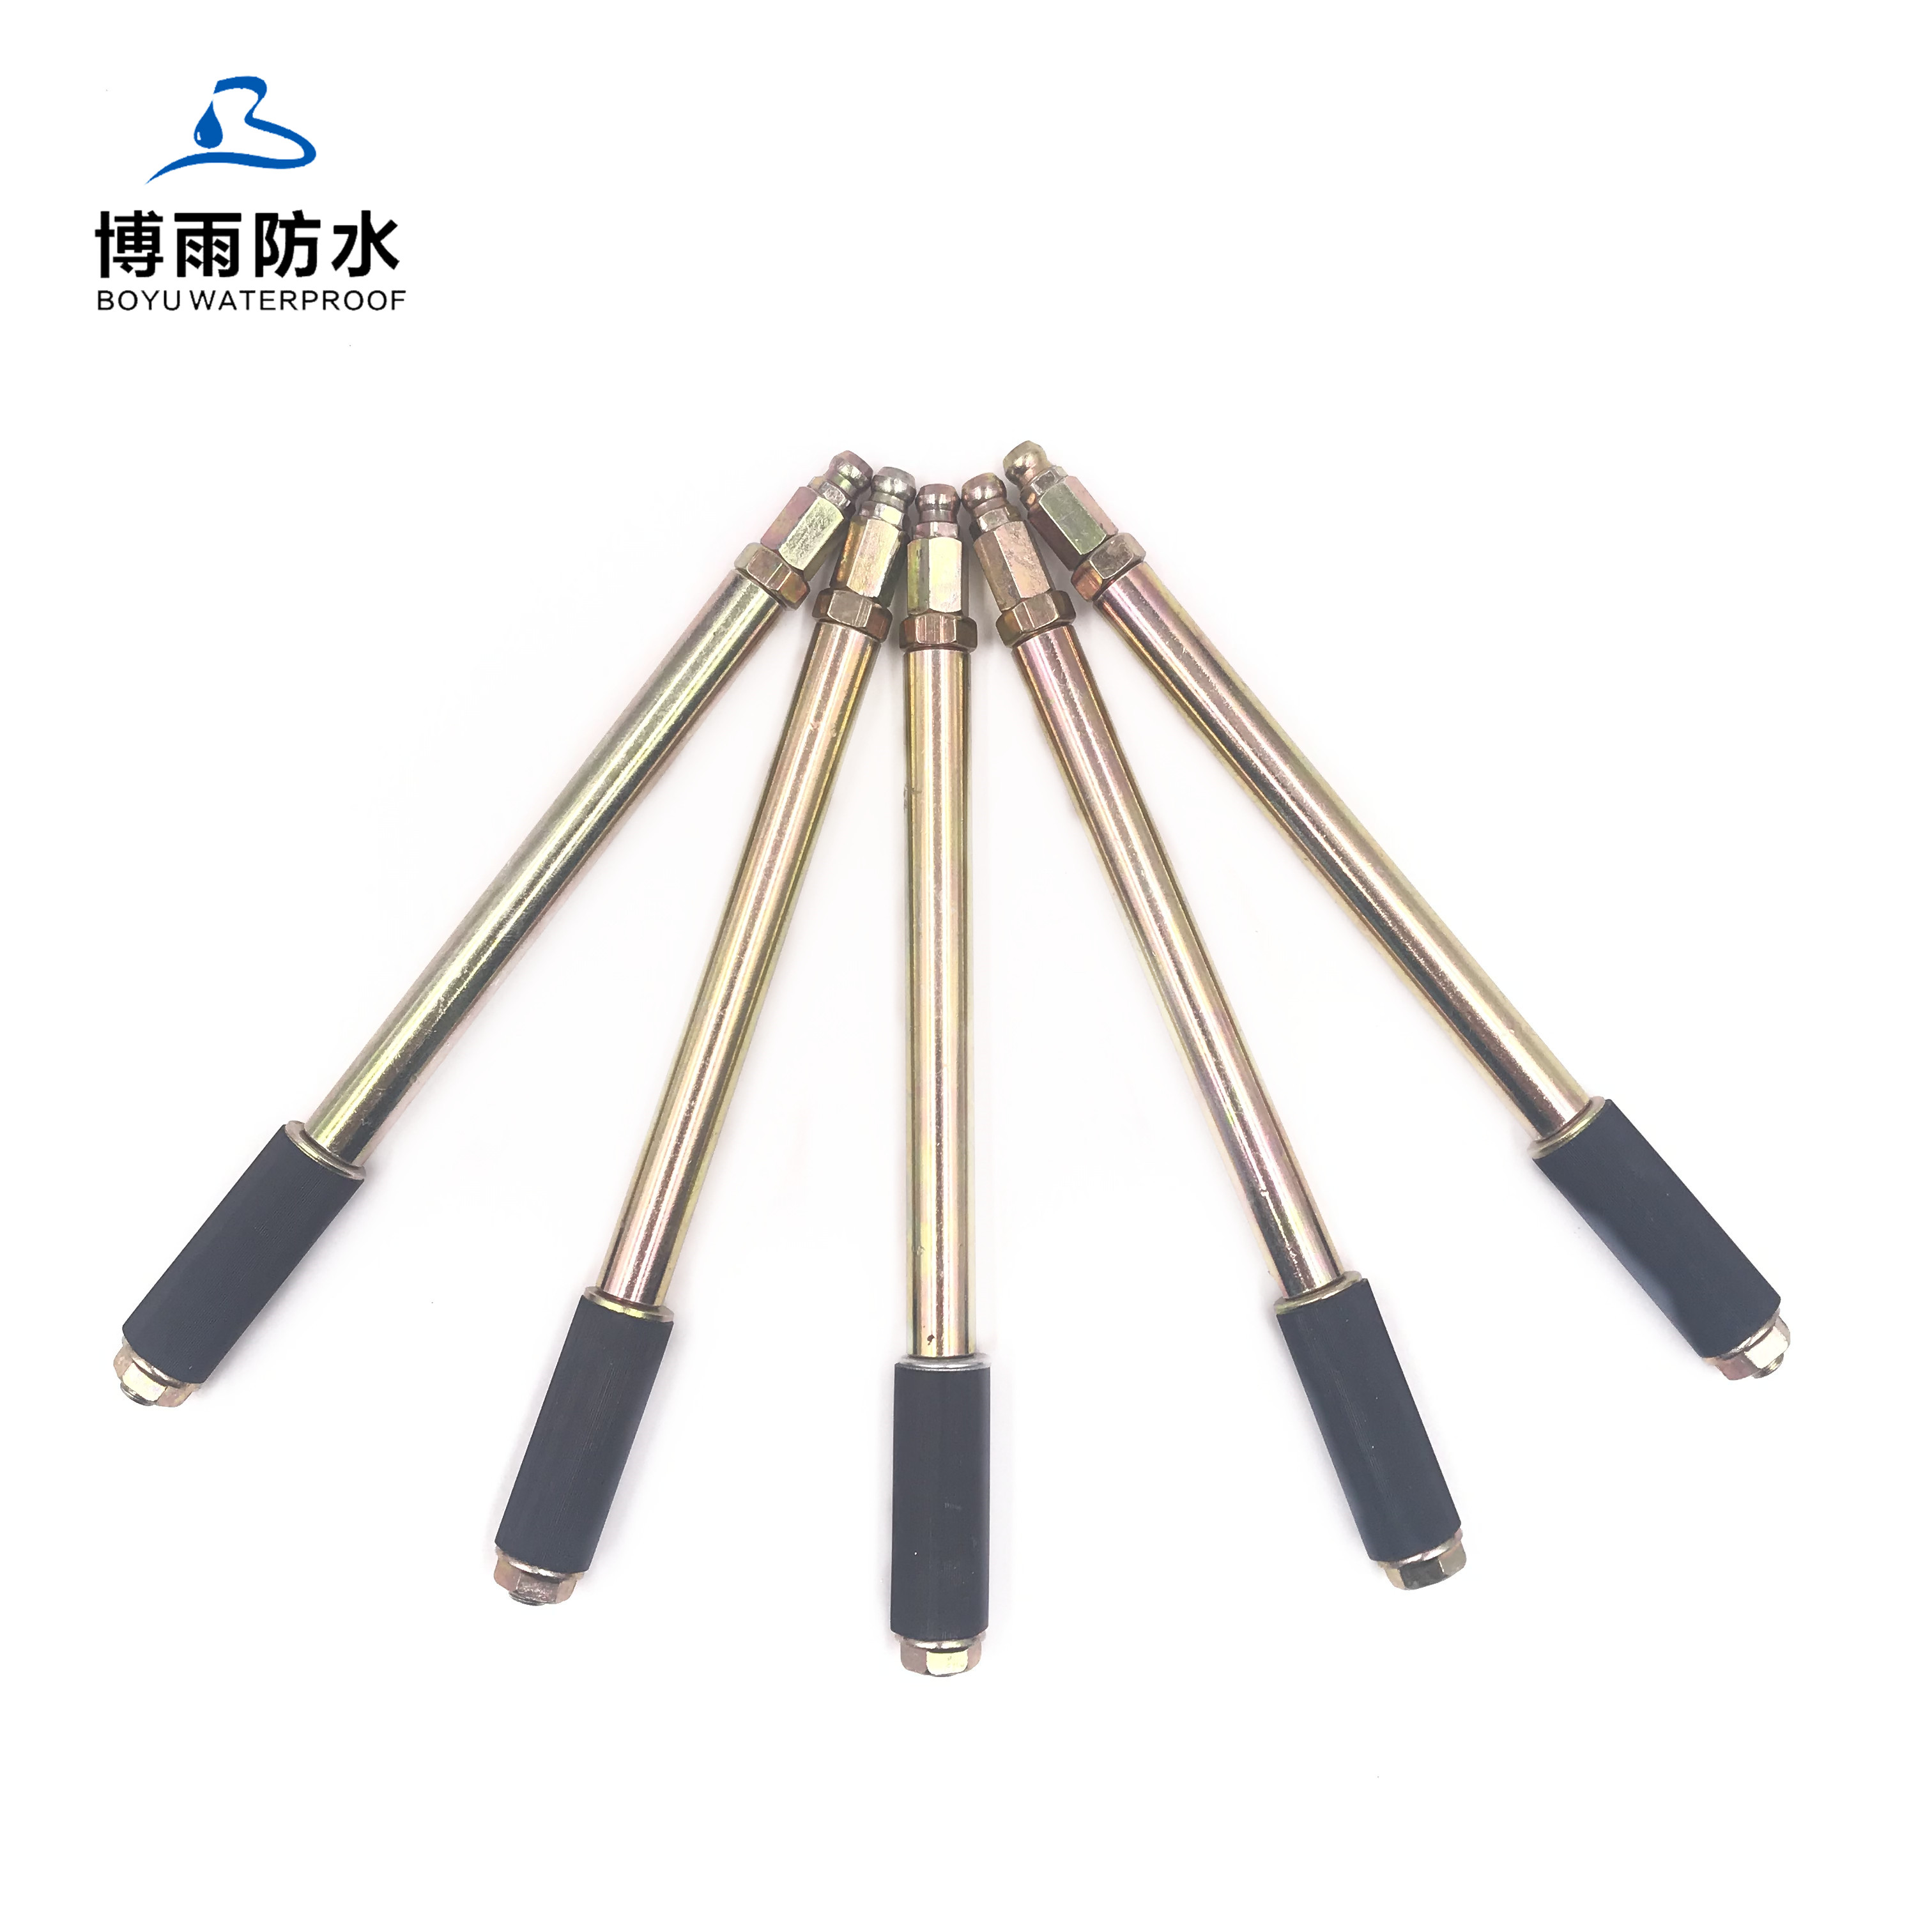 Low price for Waterproof Injection Packers - Brass color Injection Packers steel 13*150mm A15 grouting injection packers – Boyu